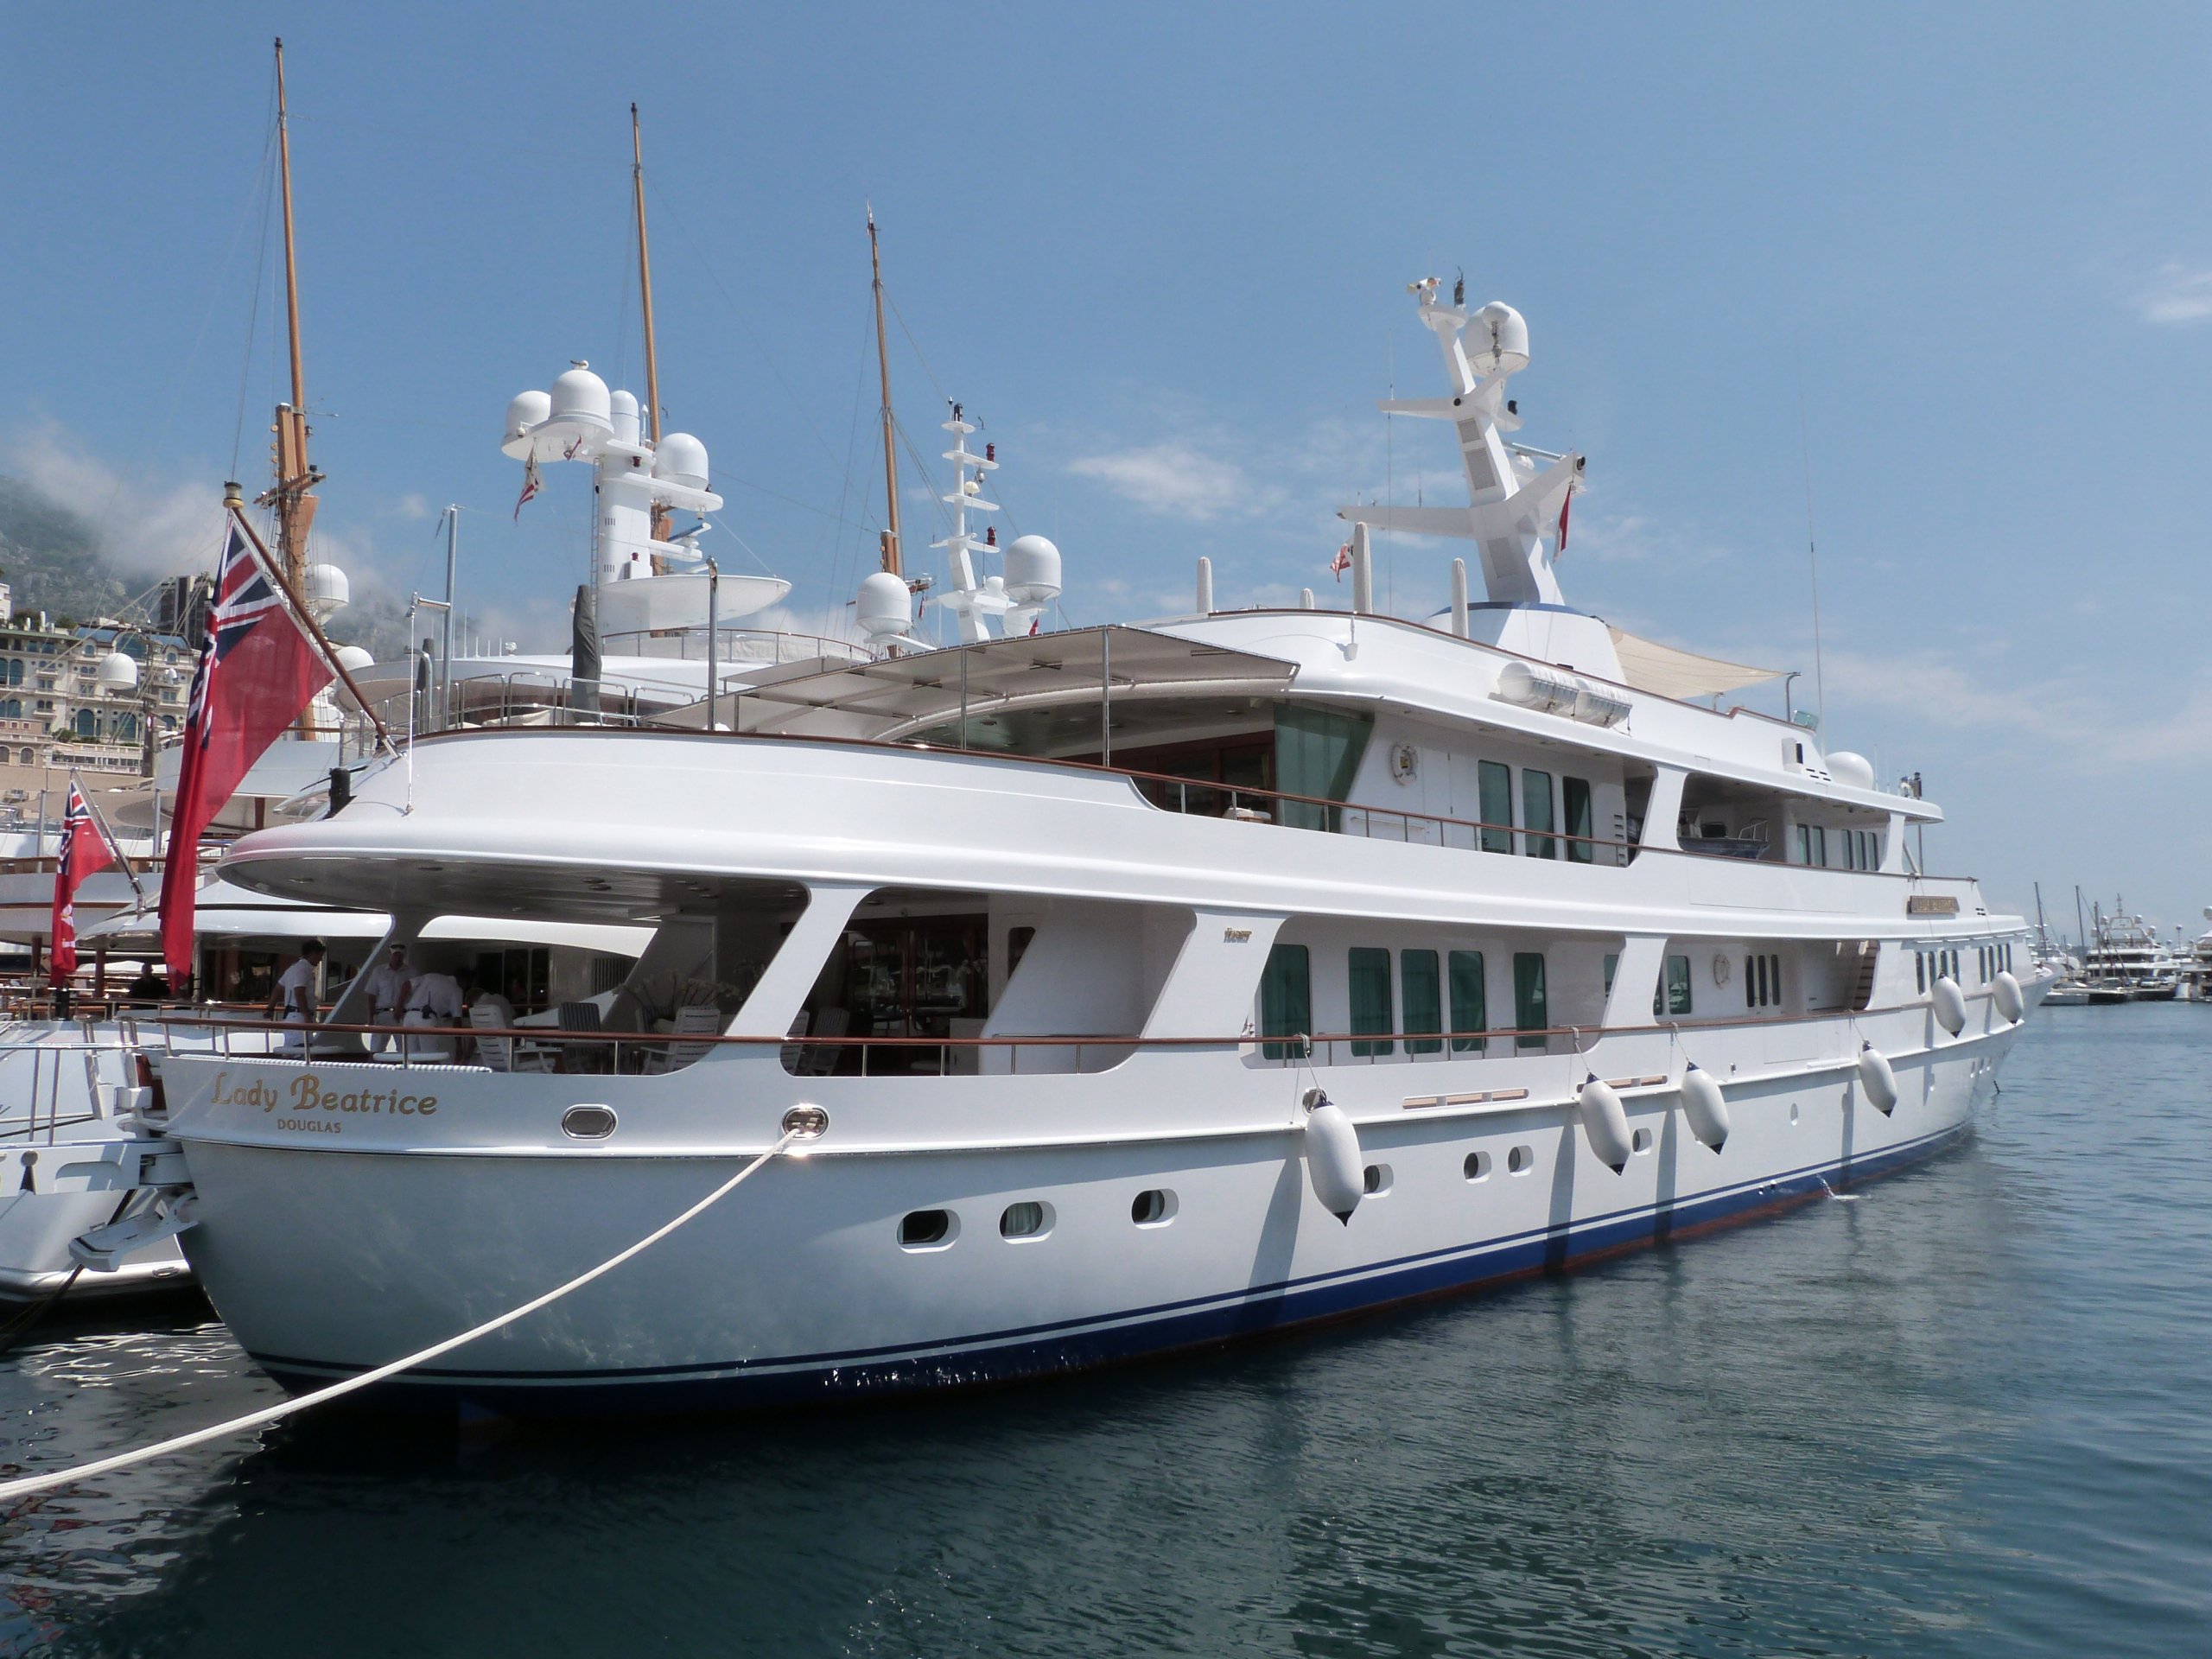 LADY BEATRICE Yacht • Feadship • 1993 • propriétaires Barclay Brothers